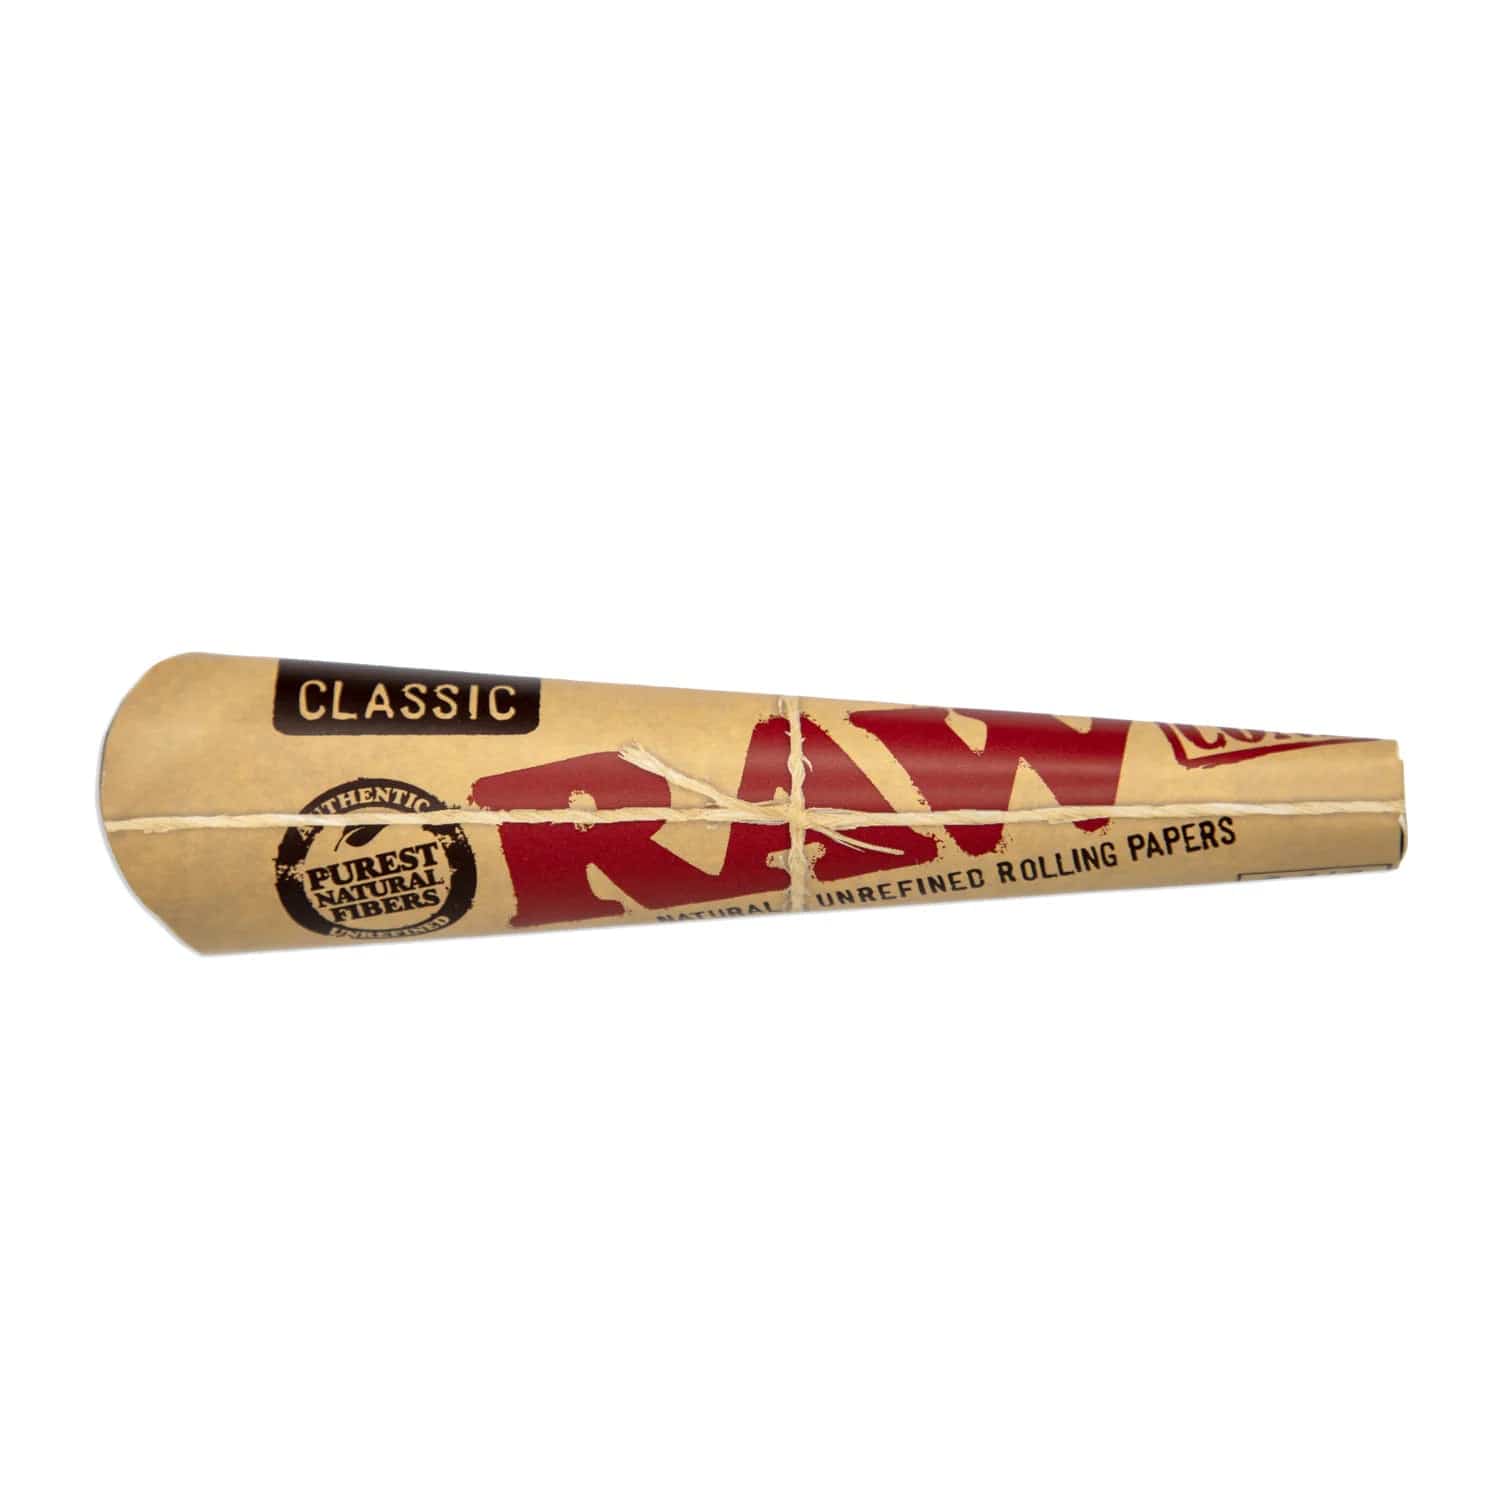 RAW RAWket FIVE CONE KIT Rolling Papers - NEW Assorted SIZES PRE ROLLED  CONES